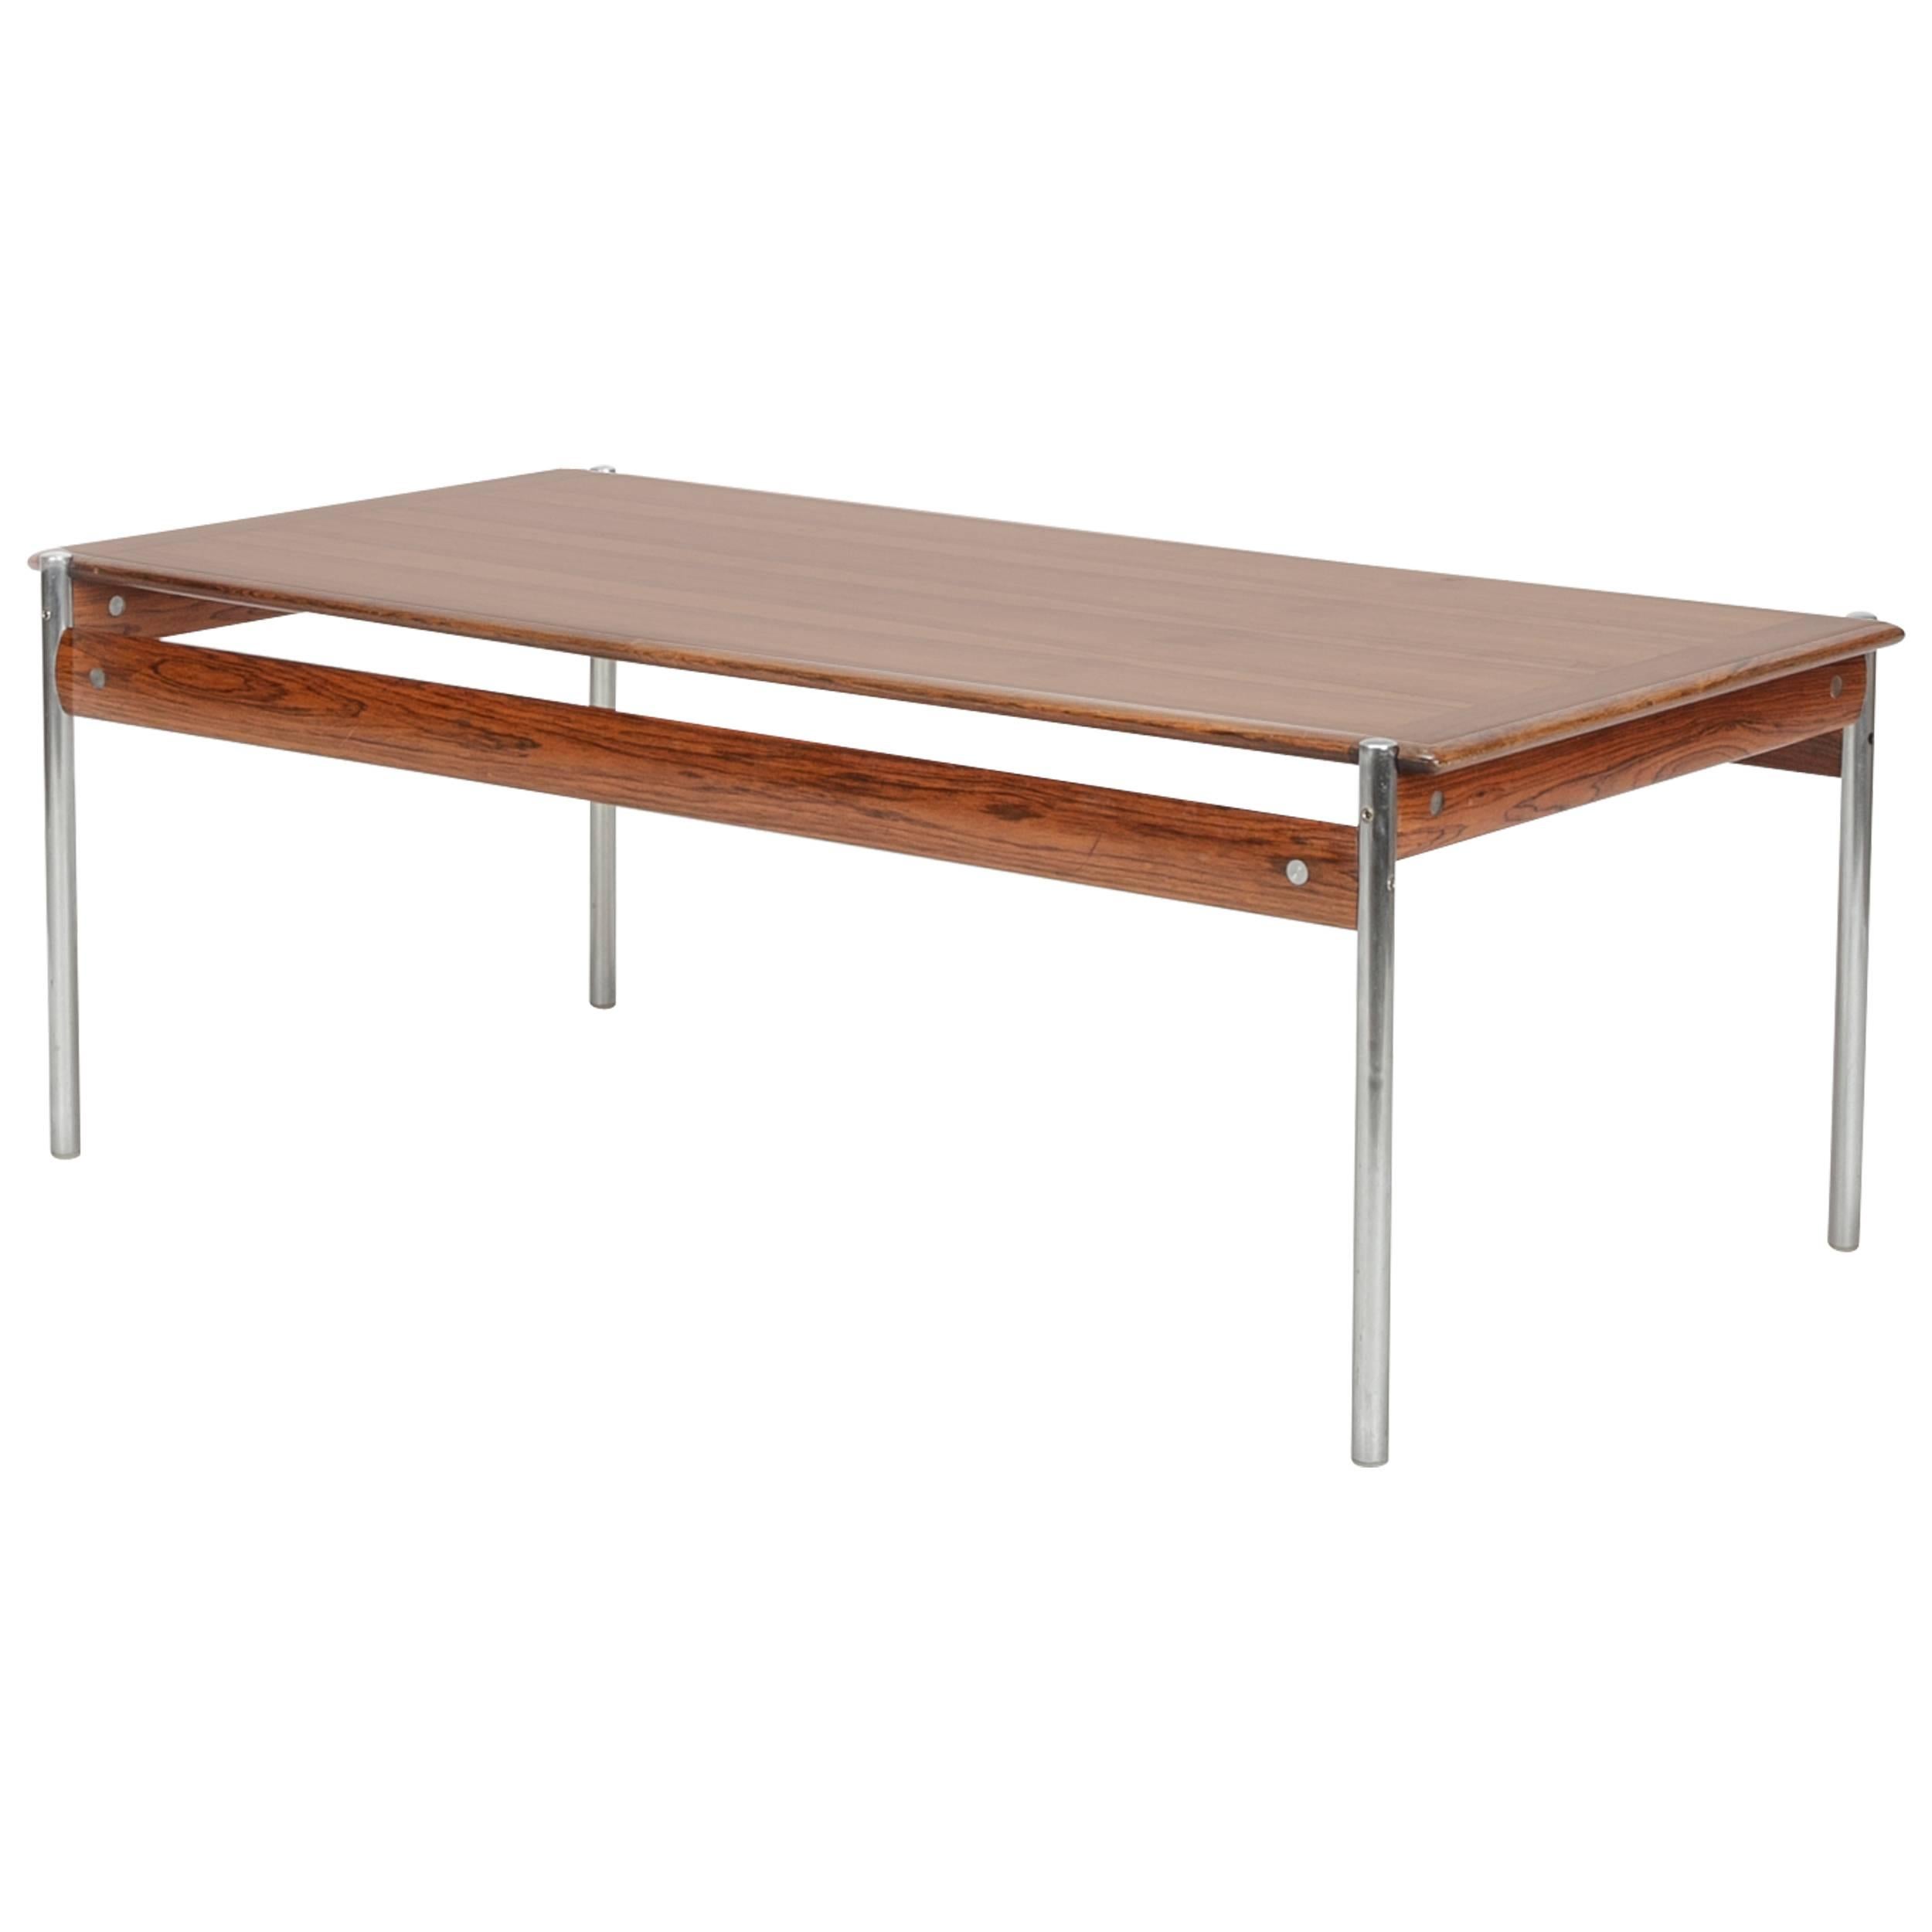 Sven Ivar Dysthe Rosewood Coffee Table Model 1001, 1959 For Sale